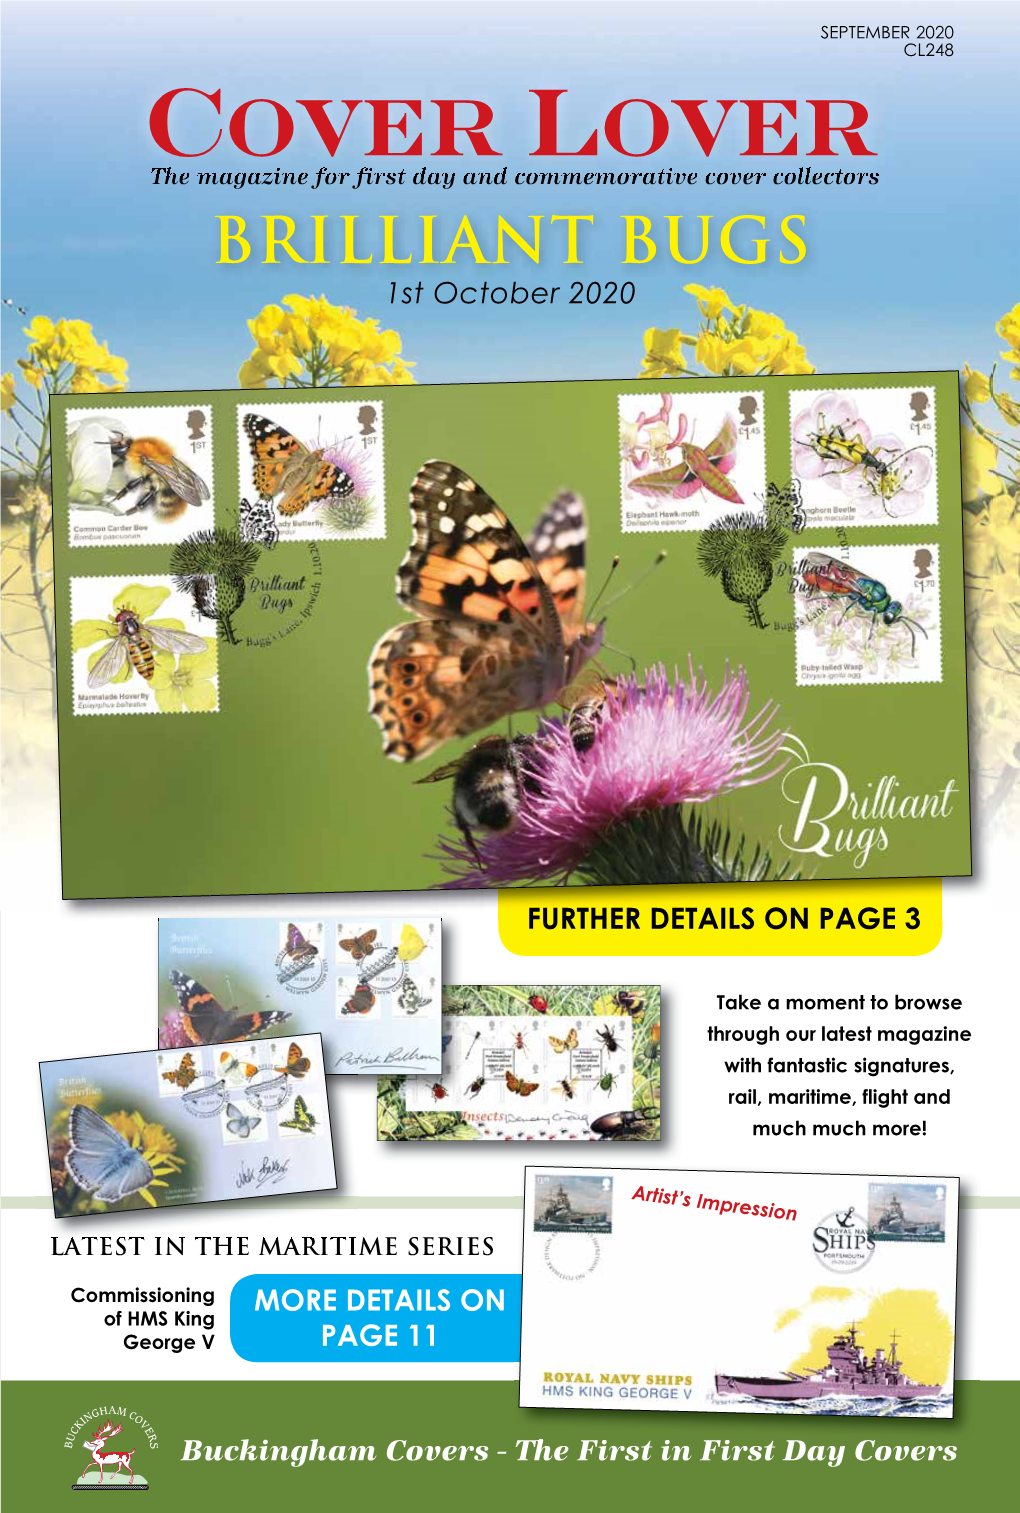 Cover Lover the Magazine for First Day and Commemorative Cover Collectors BRILLIANT BUGS 1St October 2020